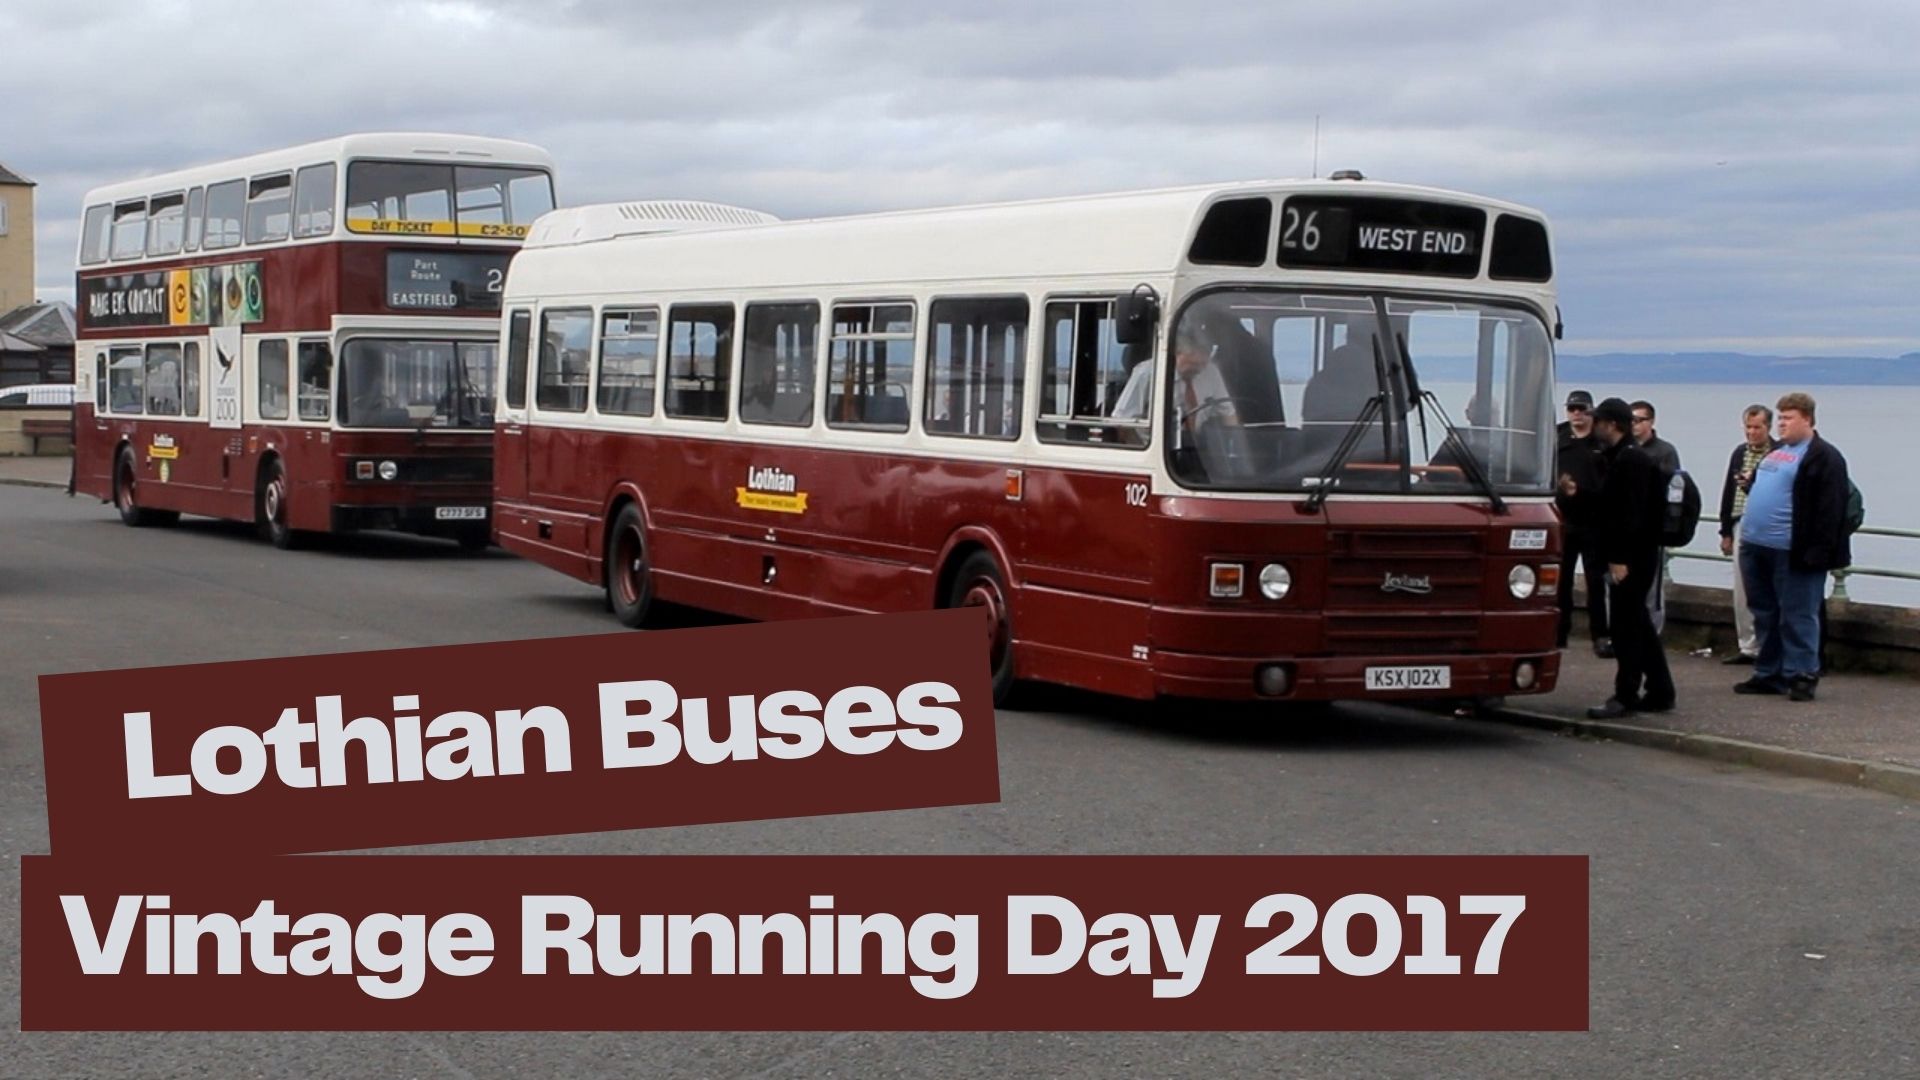 Lothian Buses Vintage Running Day Event 2017 – Central Garage Vintage Running Event [Live Event]